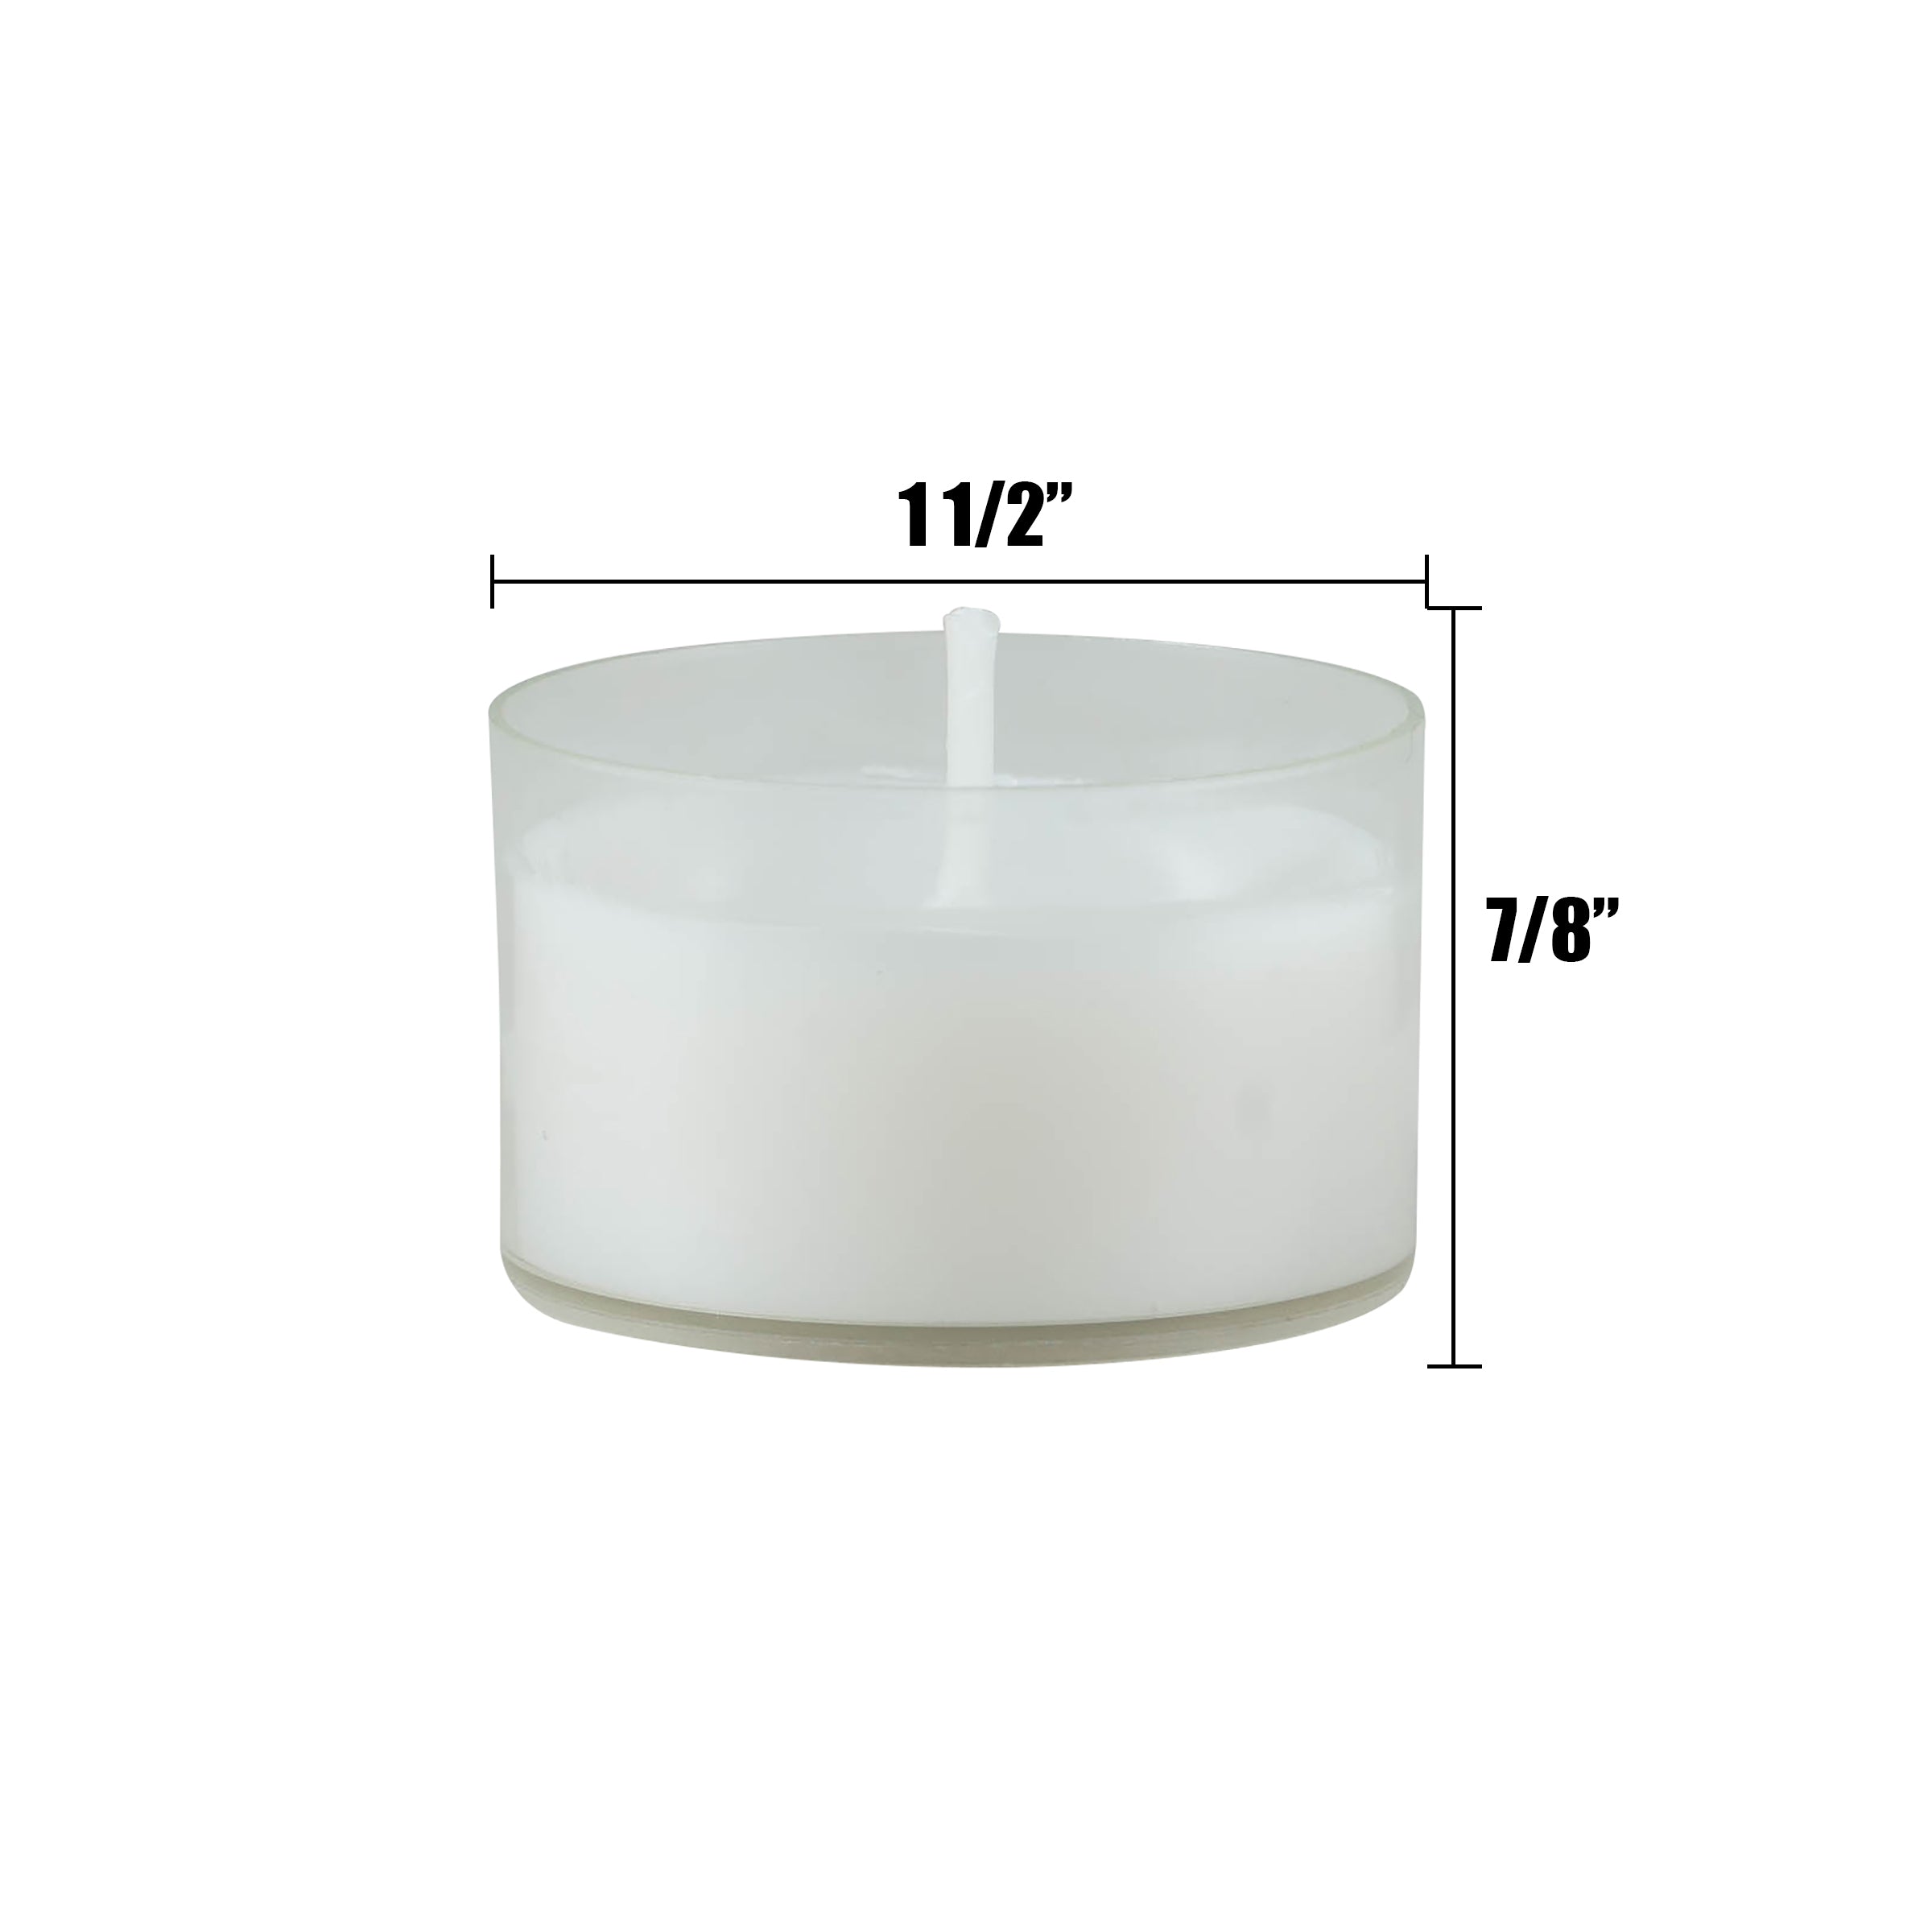 Stonebriar 6-7 Hour Long Burning Unscented Clear Cup Tea Light Candles, 96 Pack, White